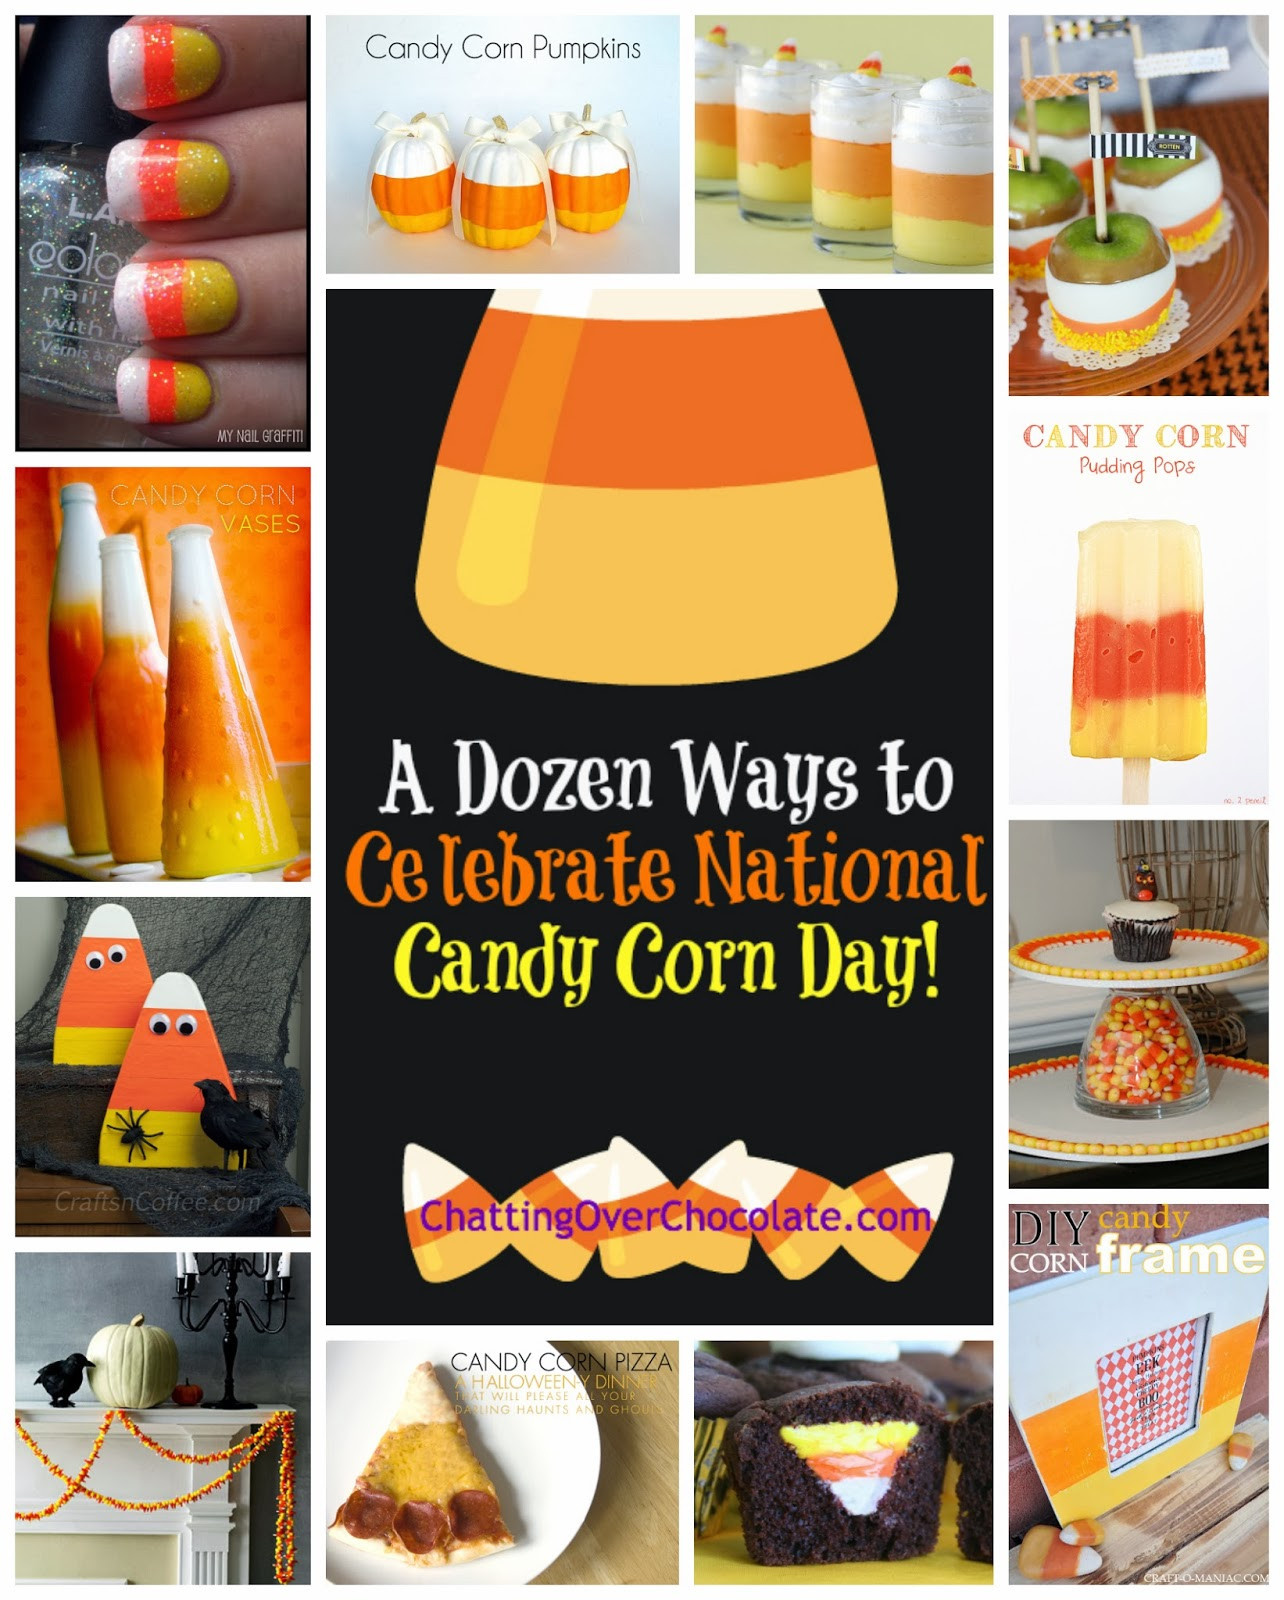 Candy Corn Day
 Chatting Over Chocolate A Dozen Ways to Celebrate